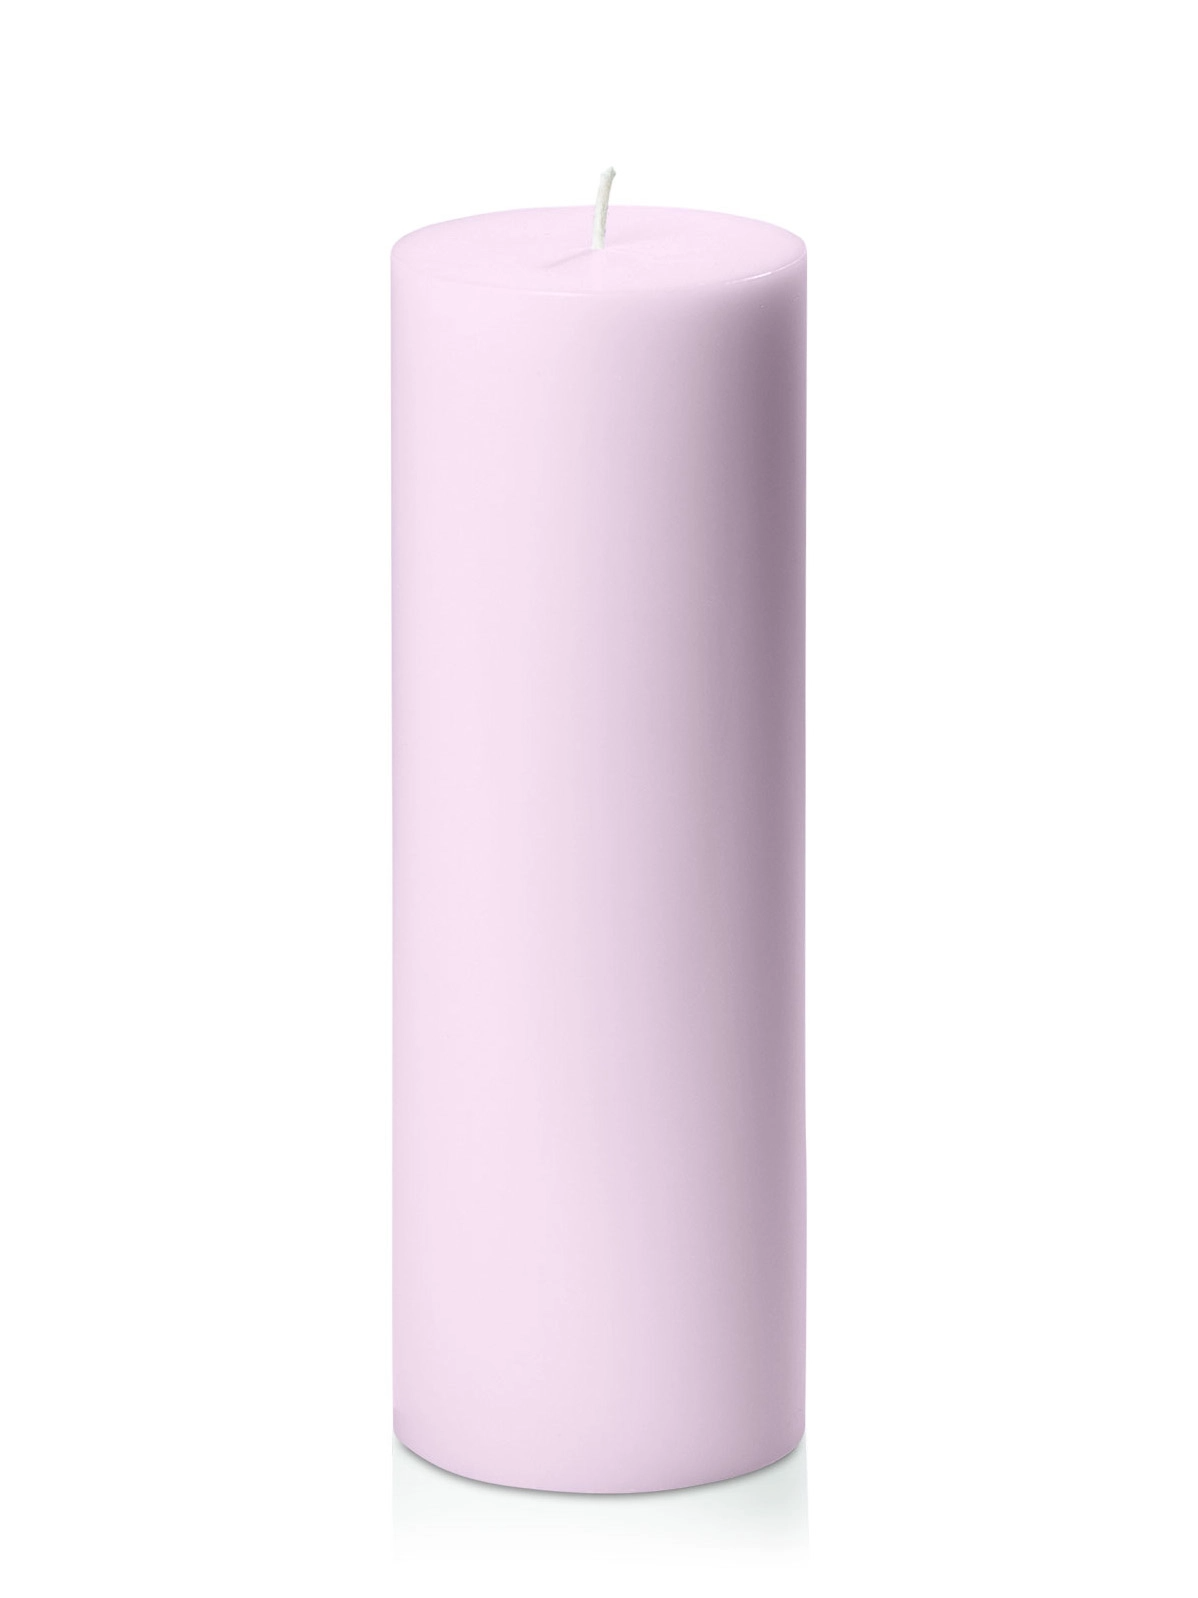 Pillar Candles 7cm x 20cm | assorted colours available